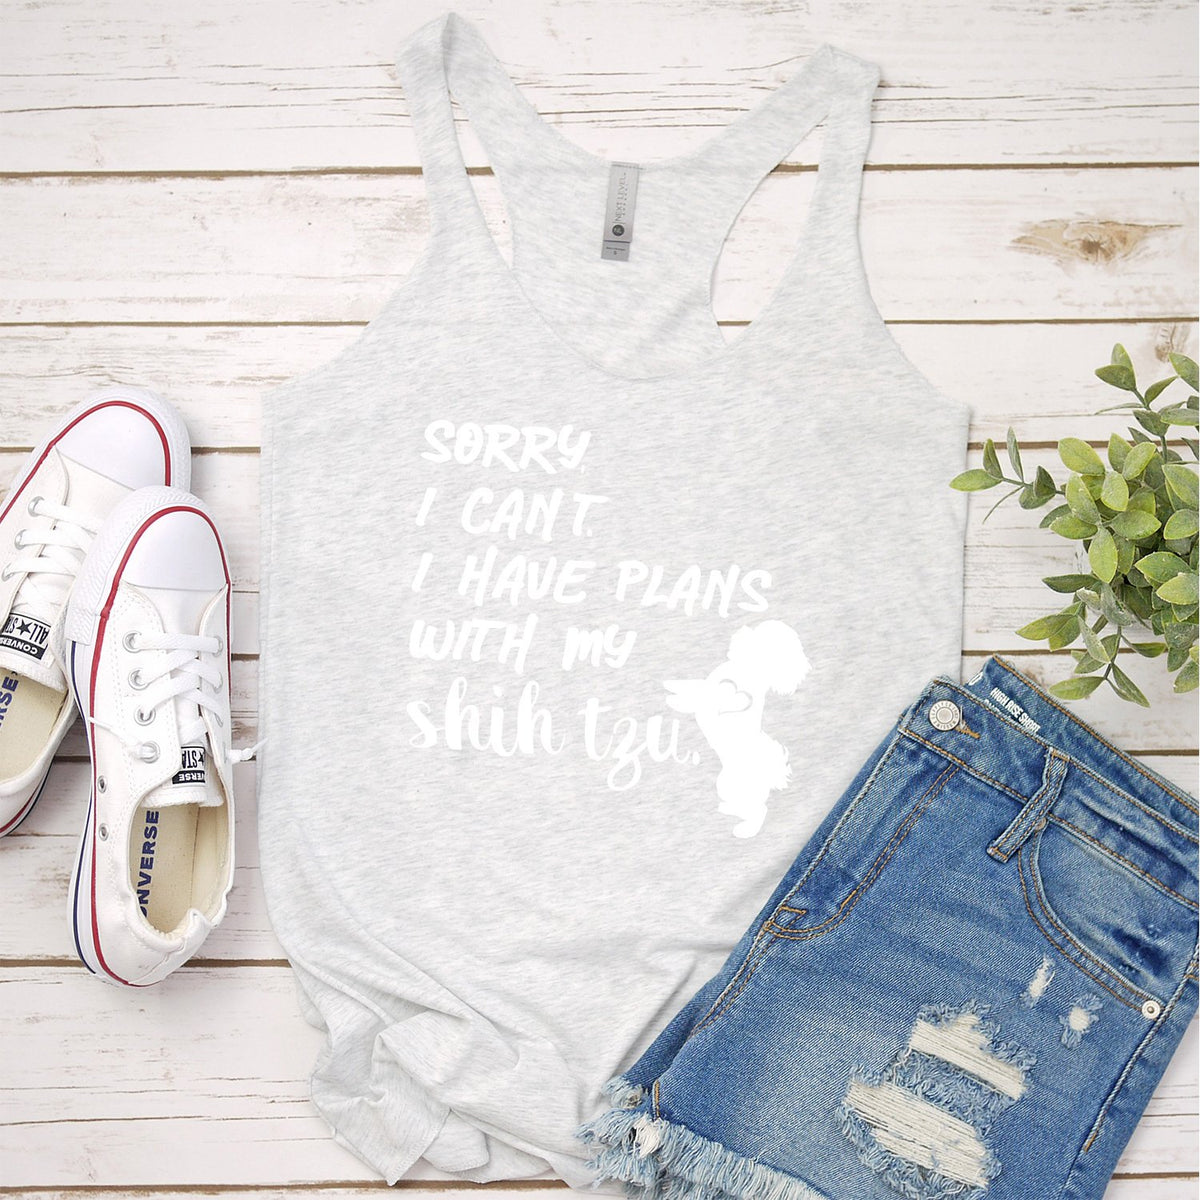 Sorry I Can&#39;t I Have Plans with My Shih Tzu - Tank Top Racerback